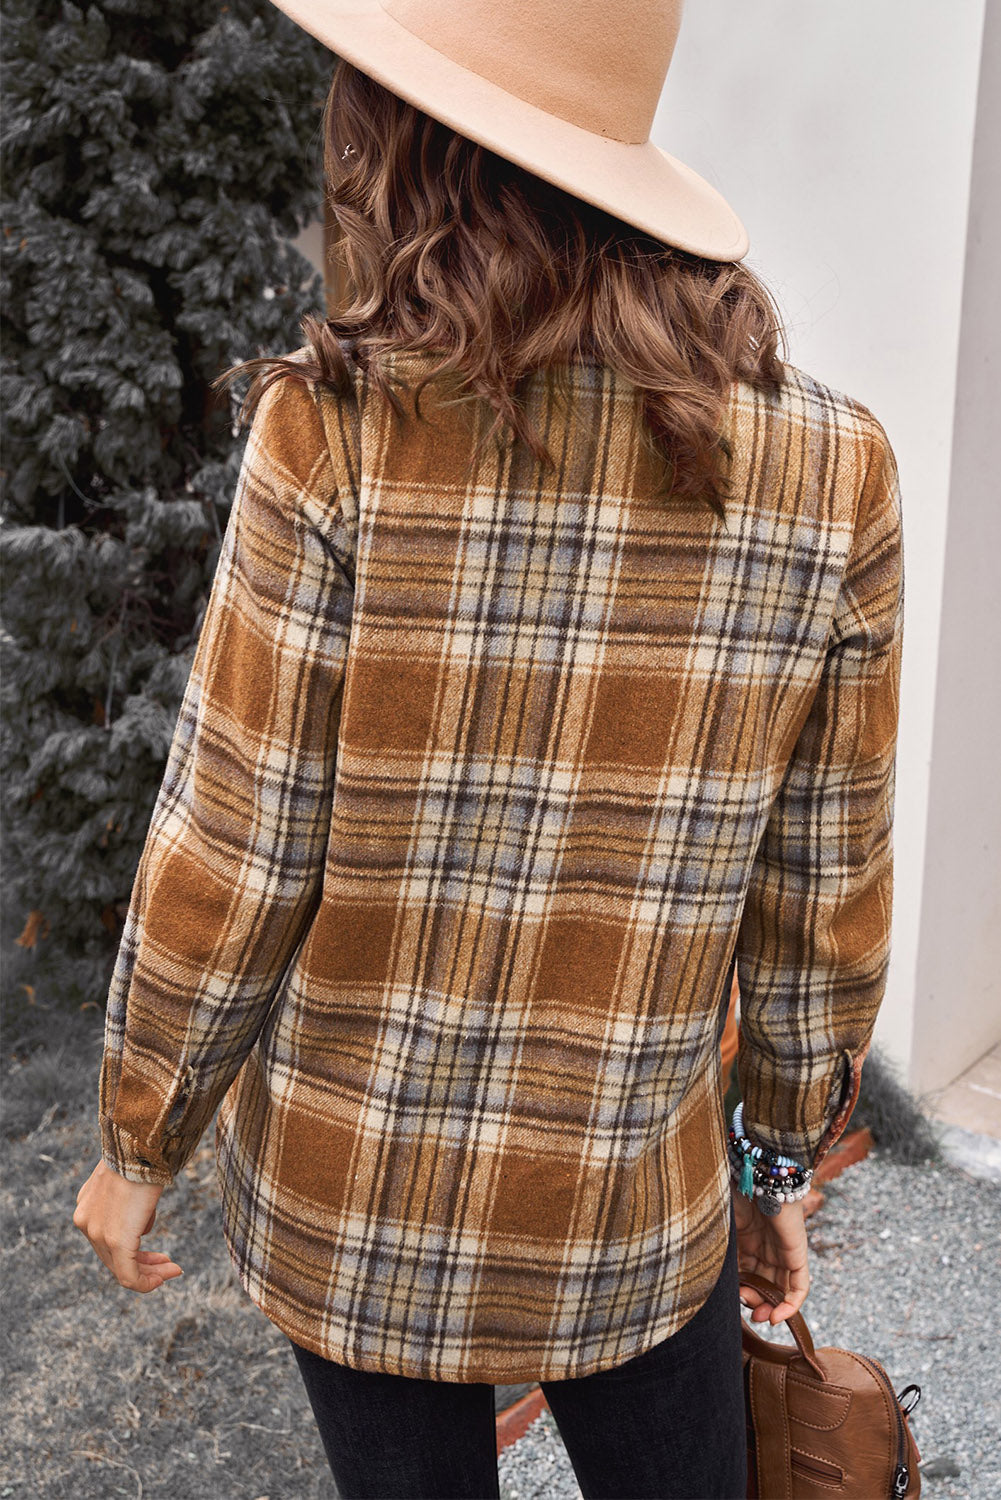 LC2551821-3-S, LC2551821-3-M, LC2551821-3-L, LC2551821-3-XL, LC2551821-3-2XL, Red Oversize Rounded Hem Plaid Shirt with Slits